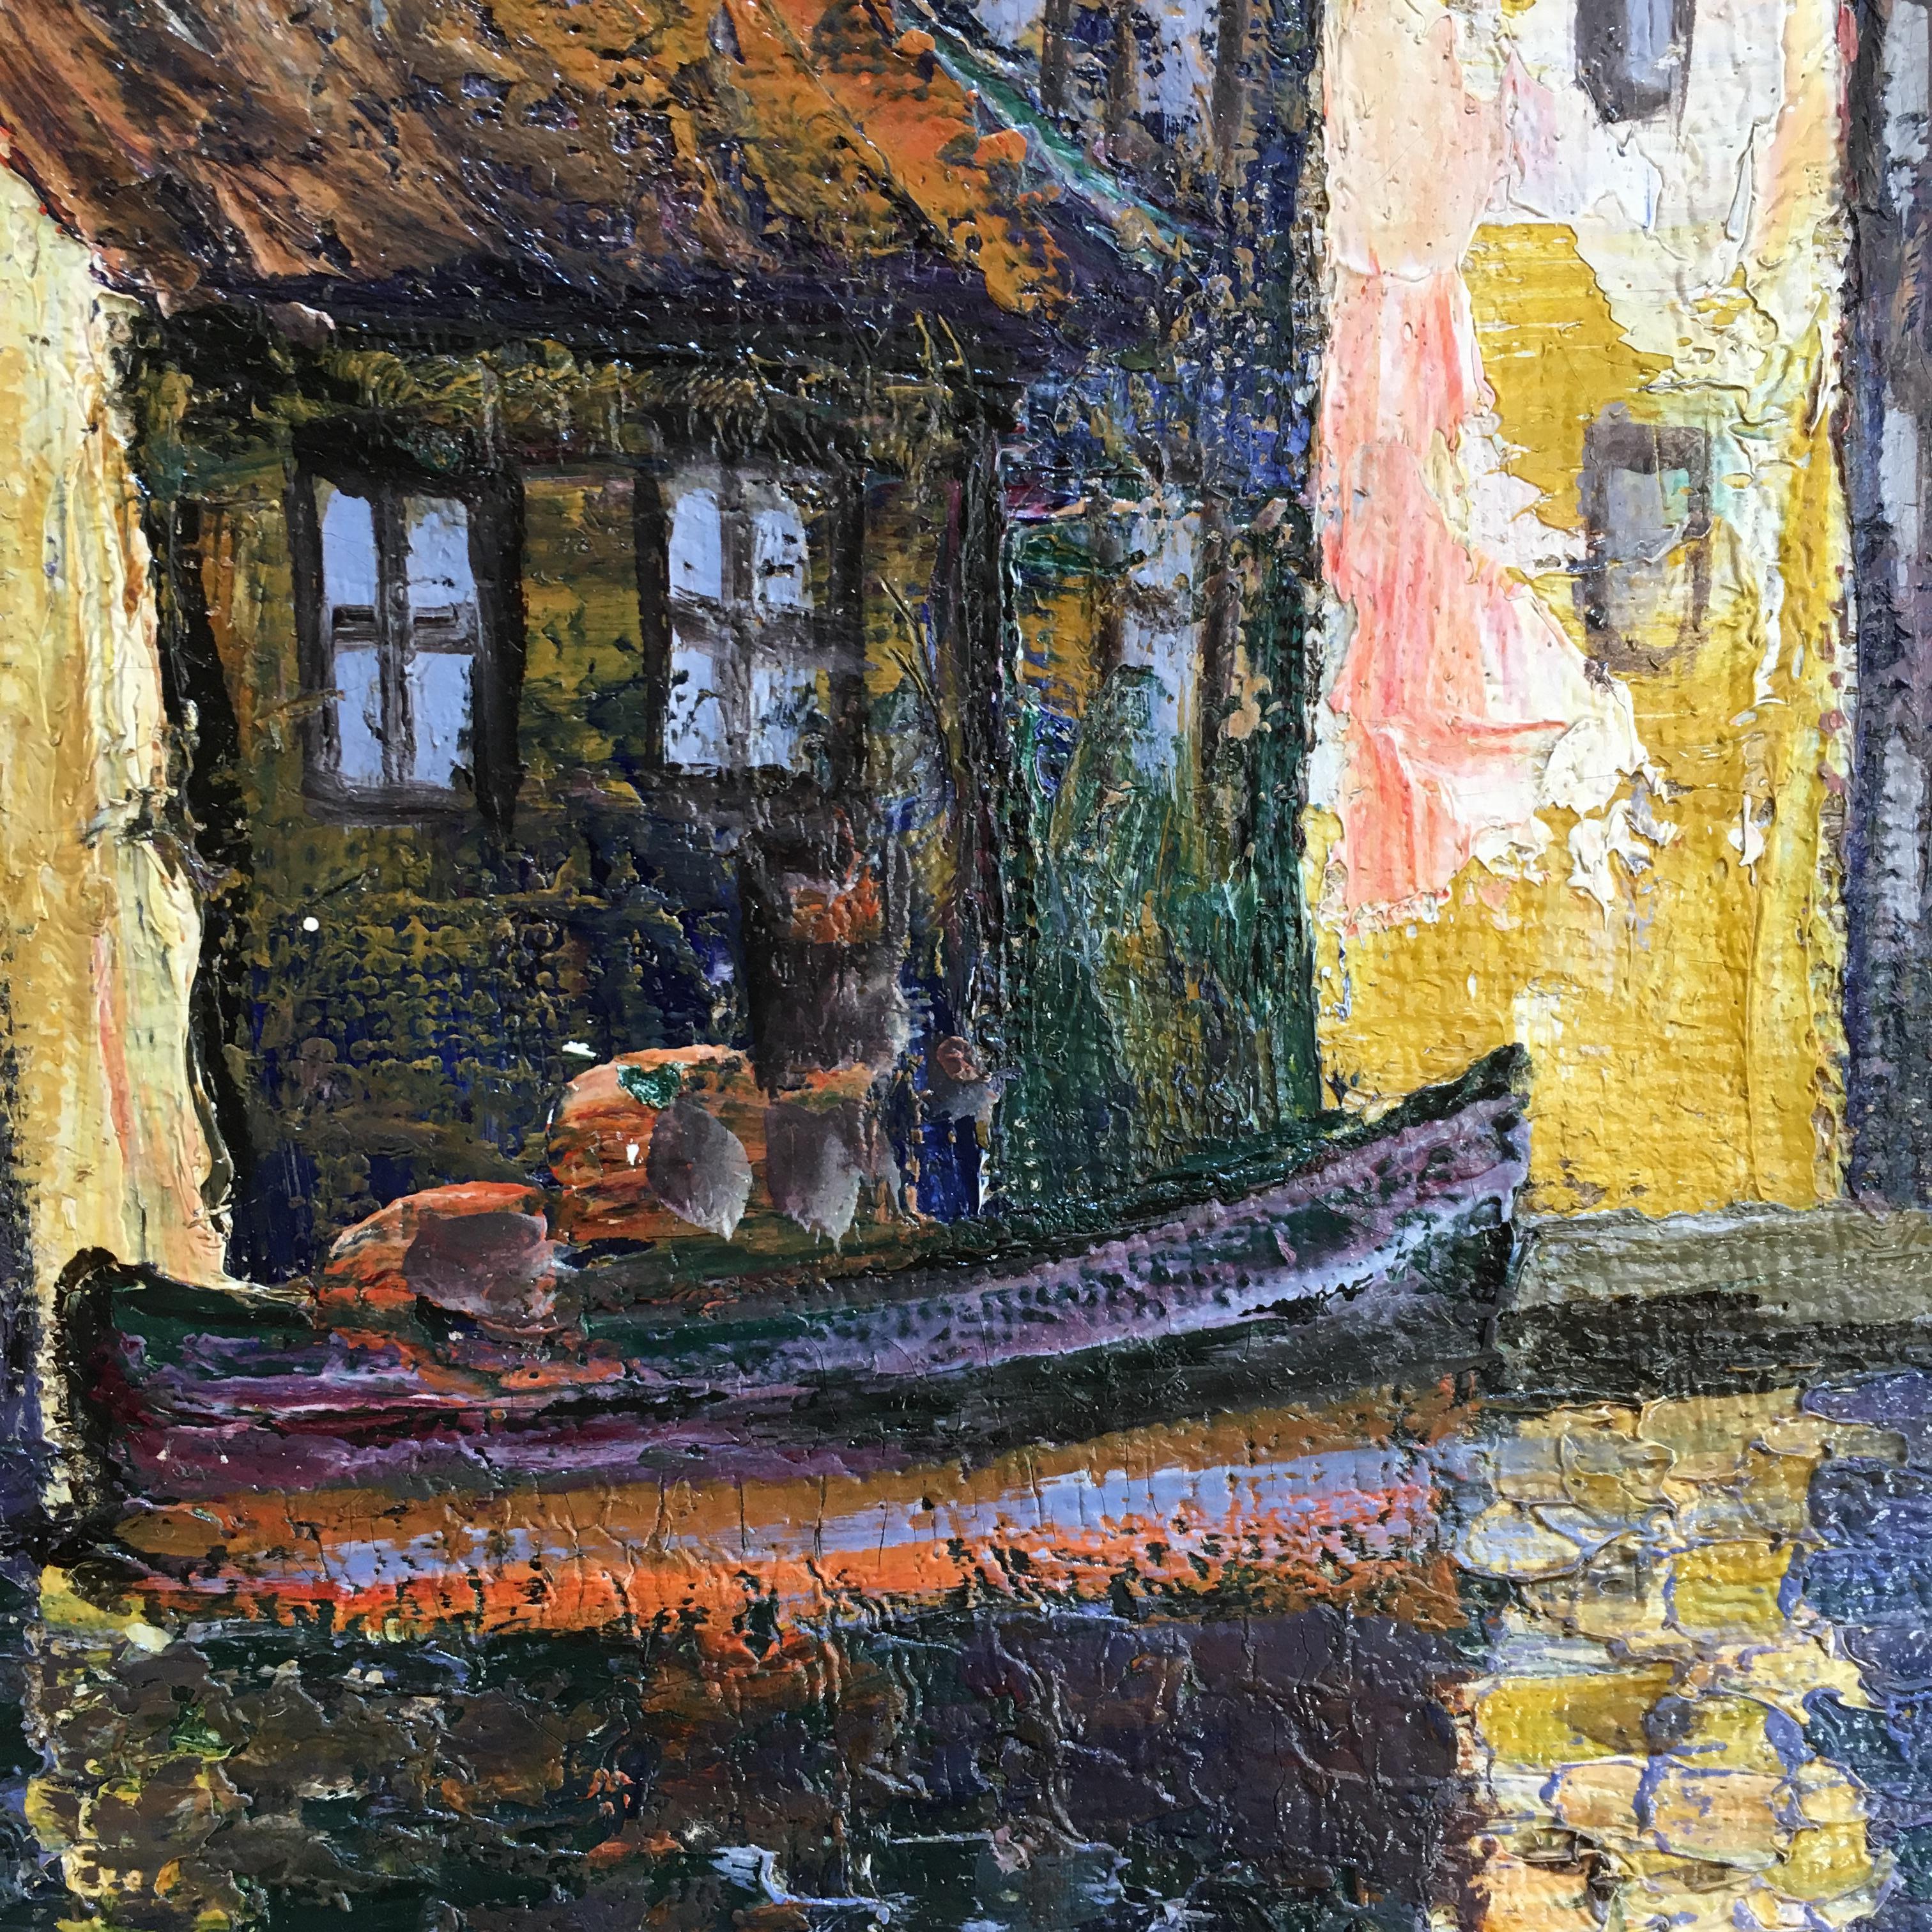 Canals of Amsterdam - Painting by Tuure Khanthill